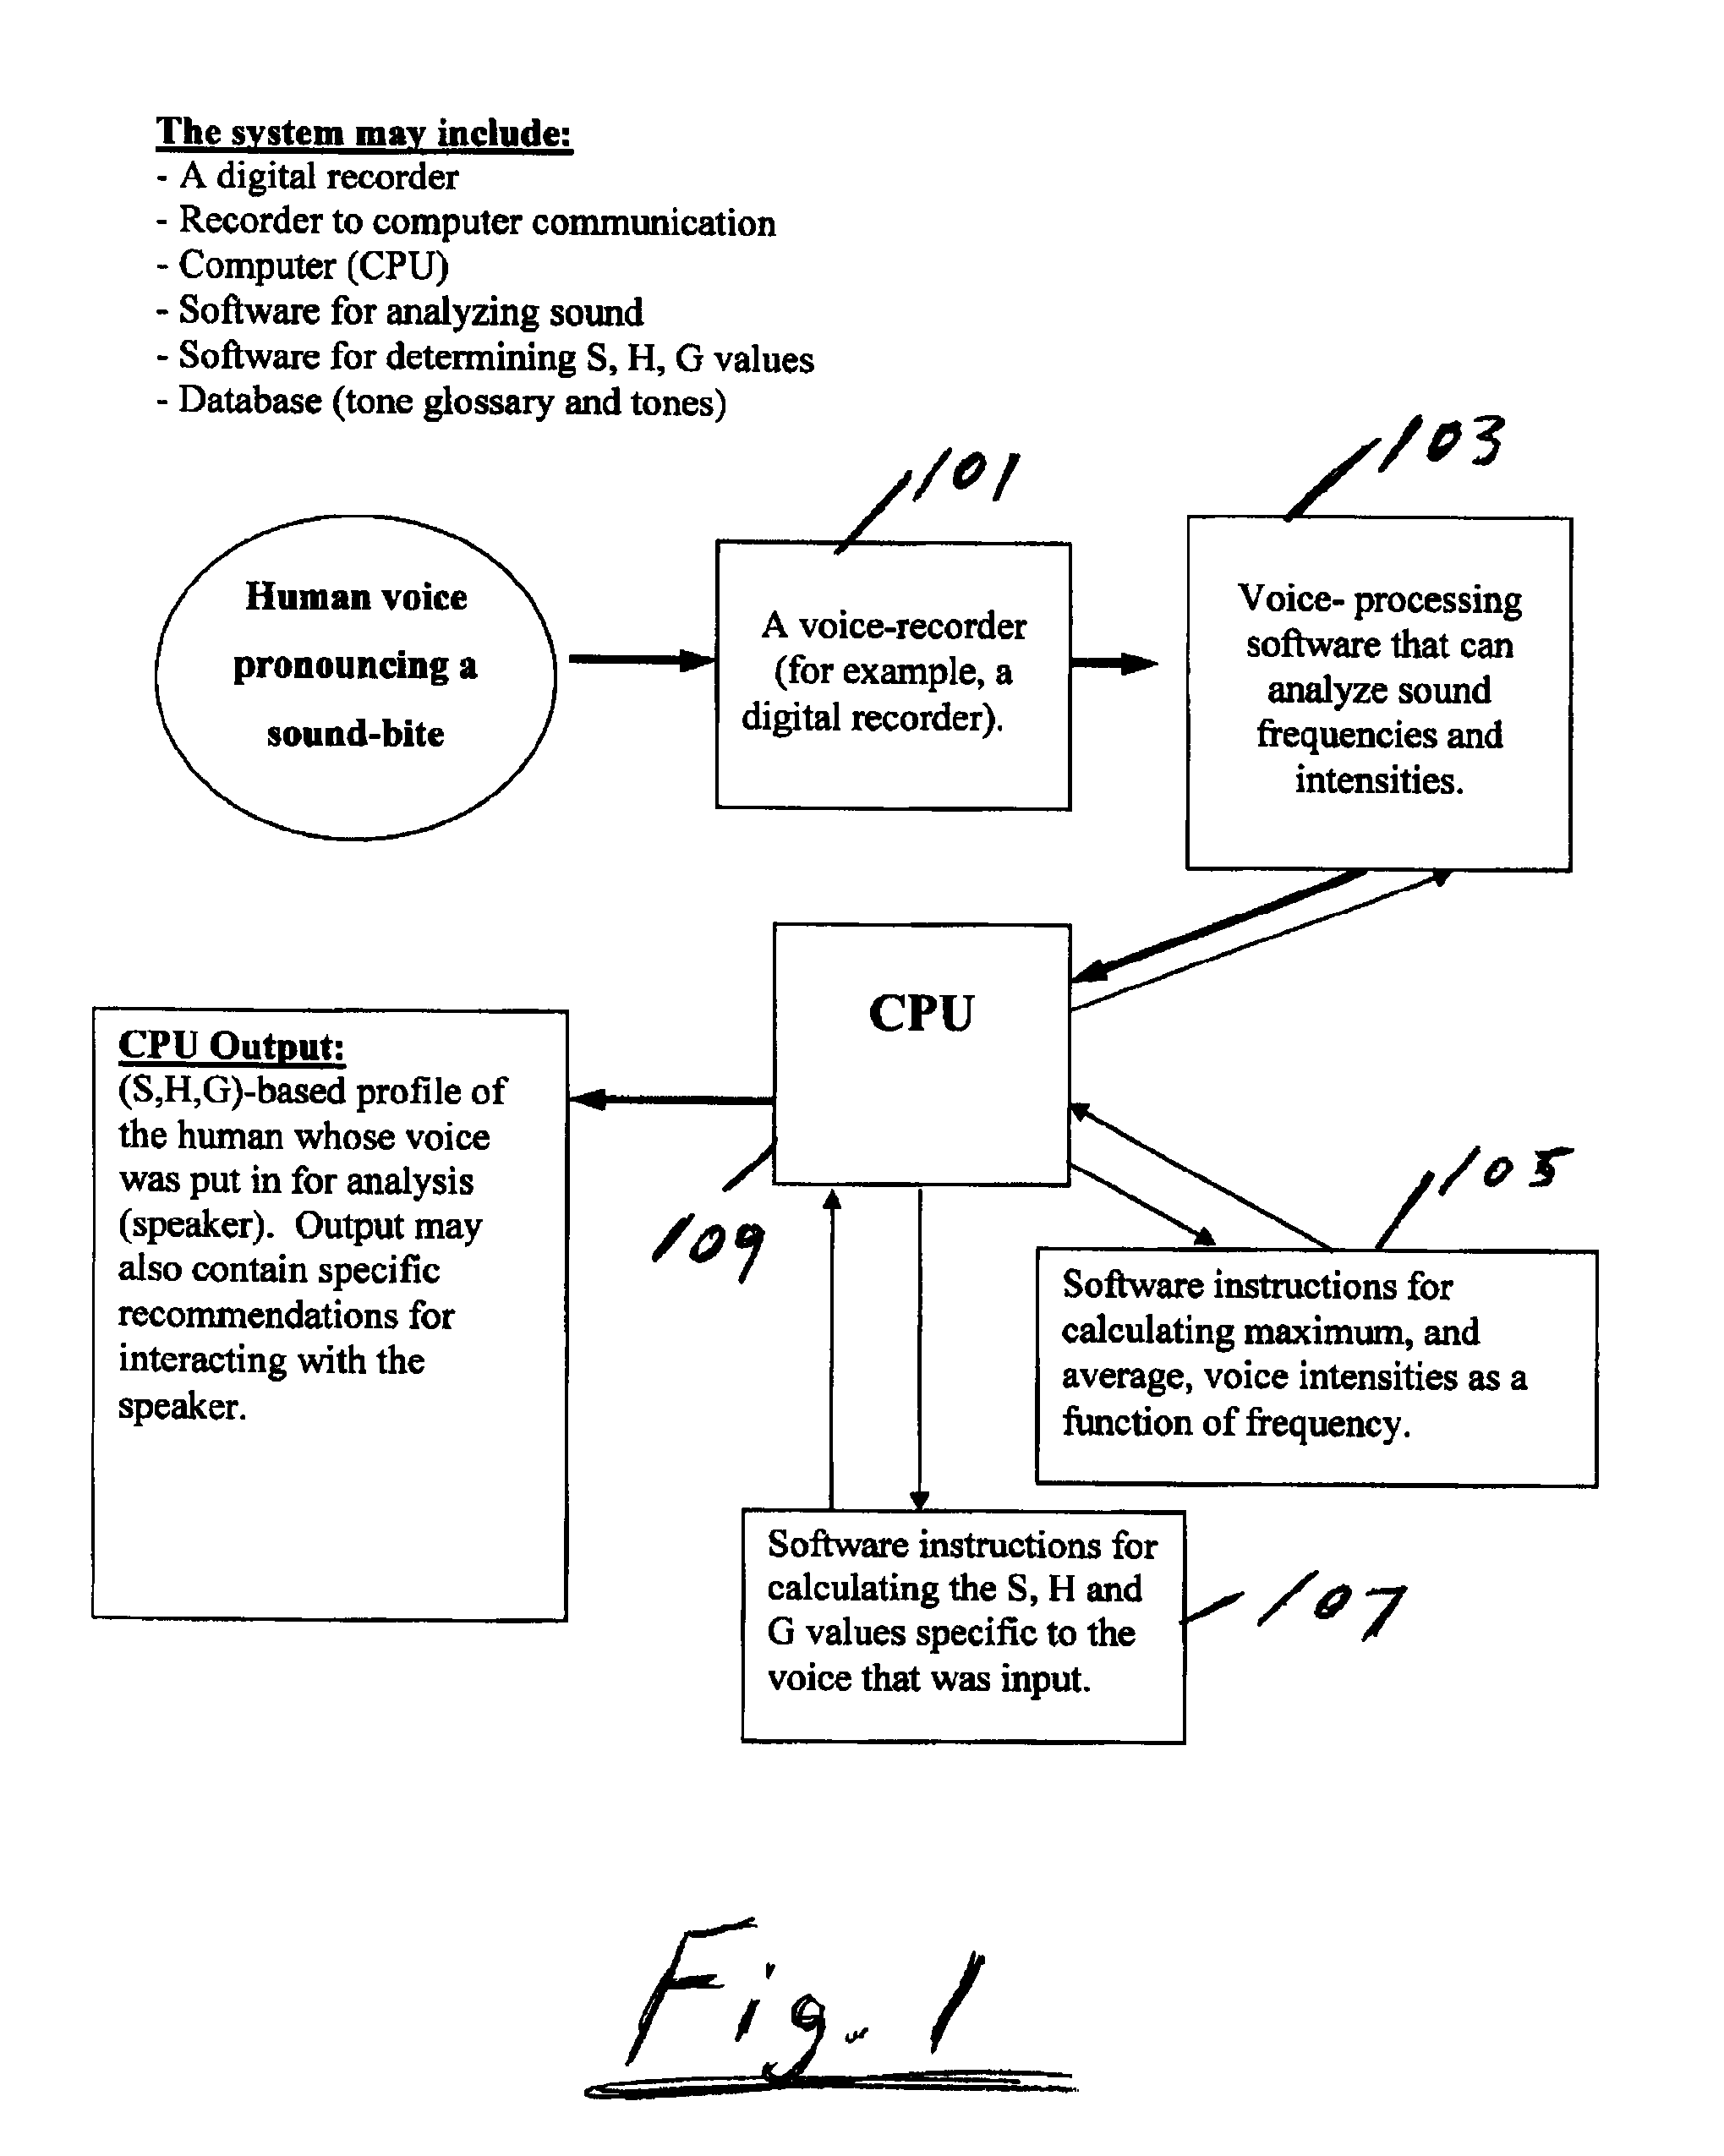 System and method for determining a personal SHG profile by voice analysis